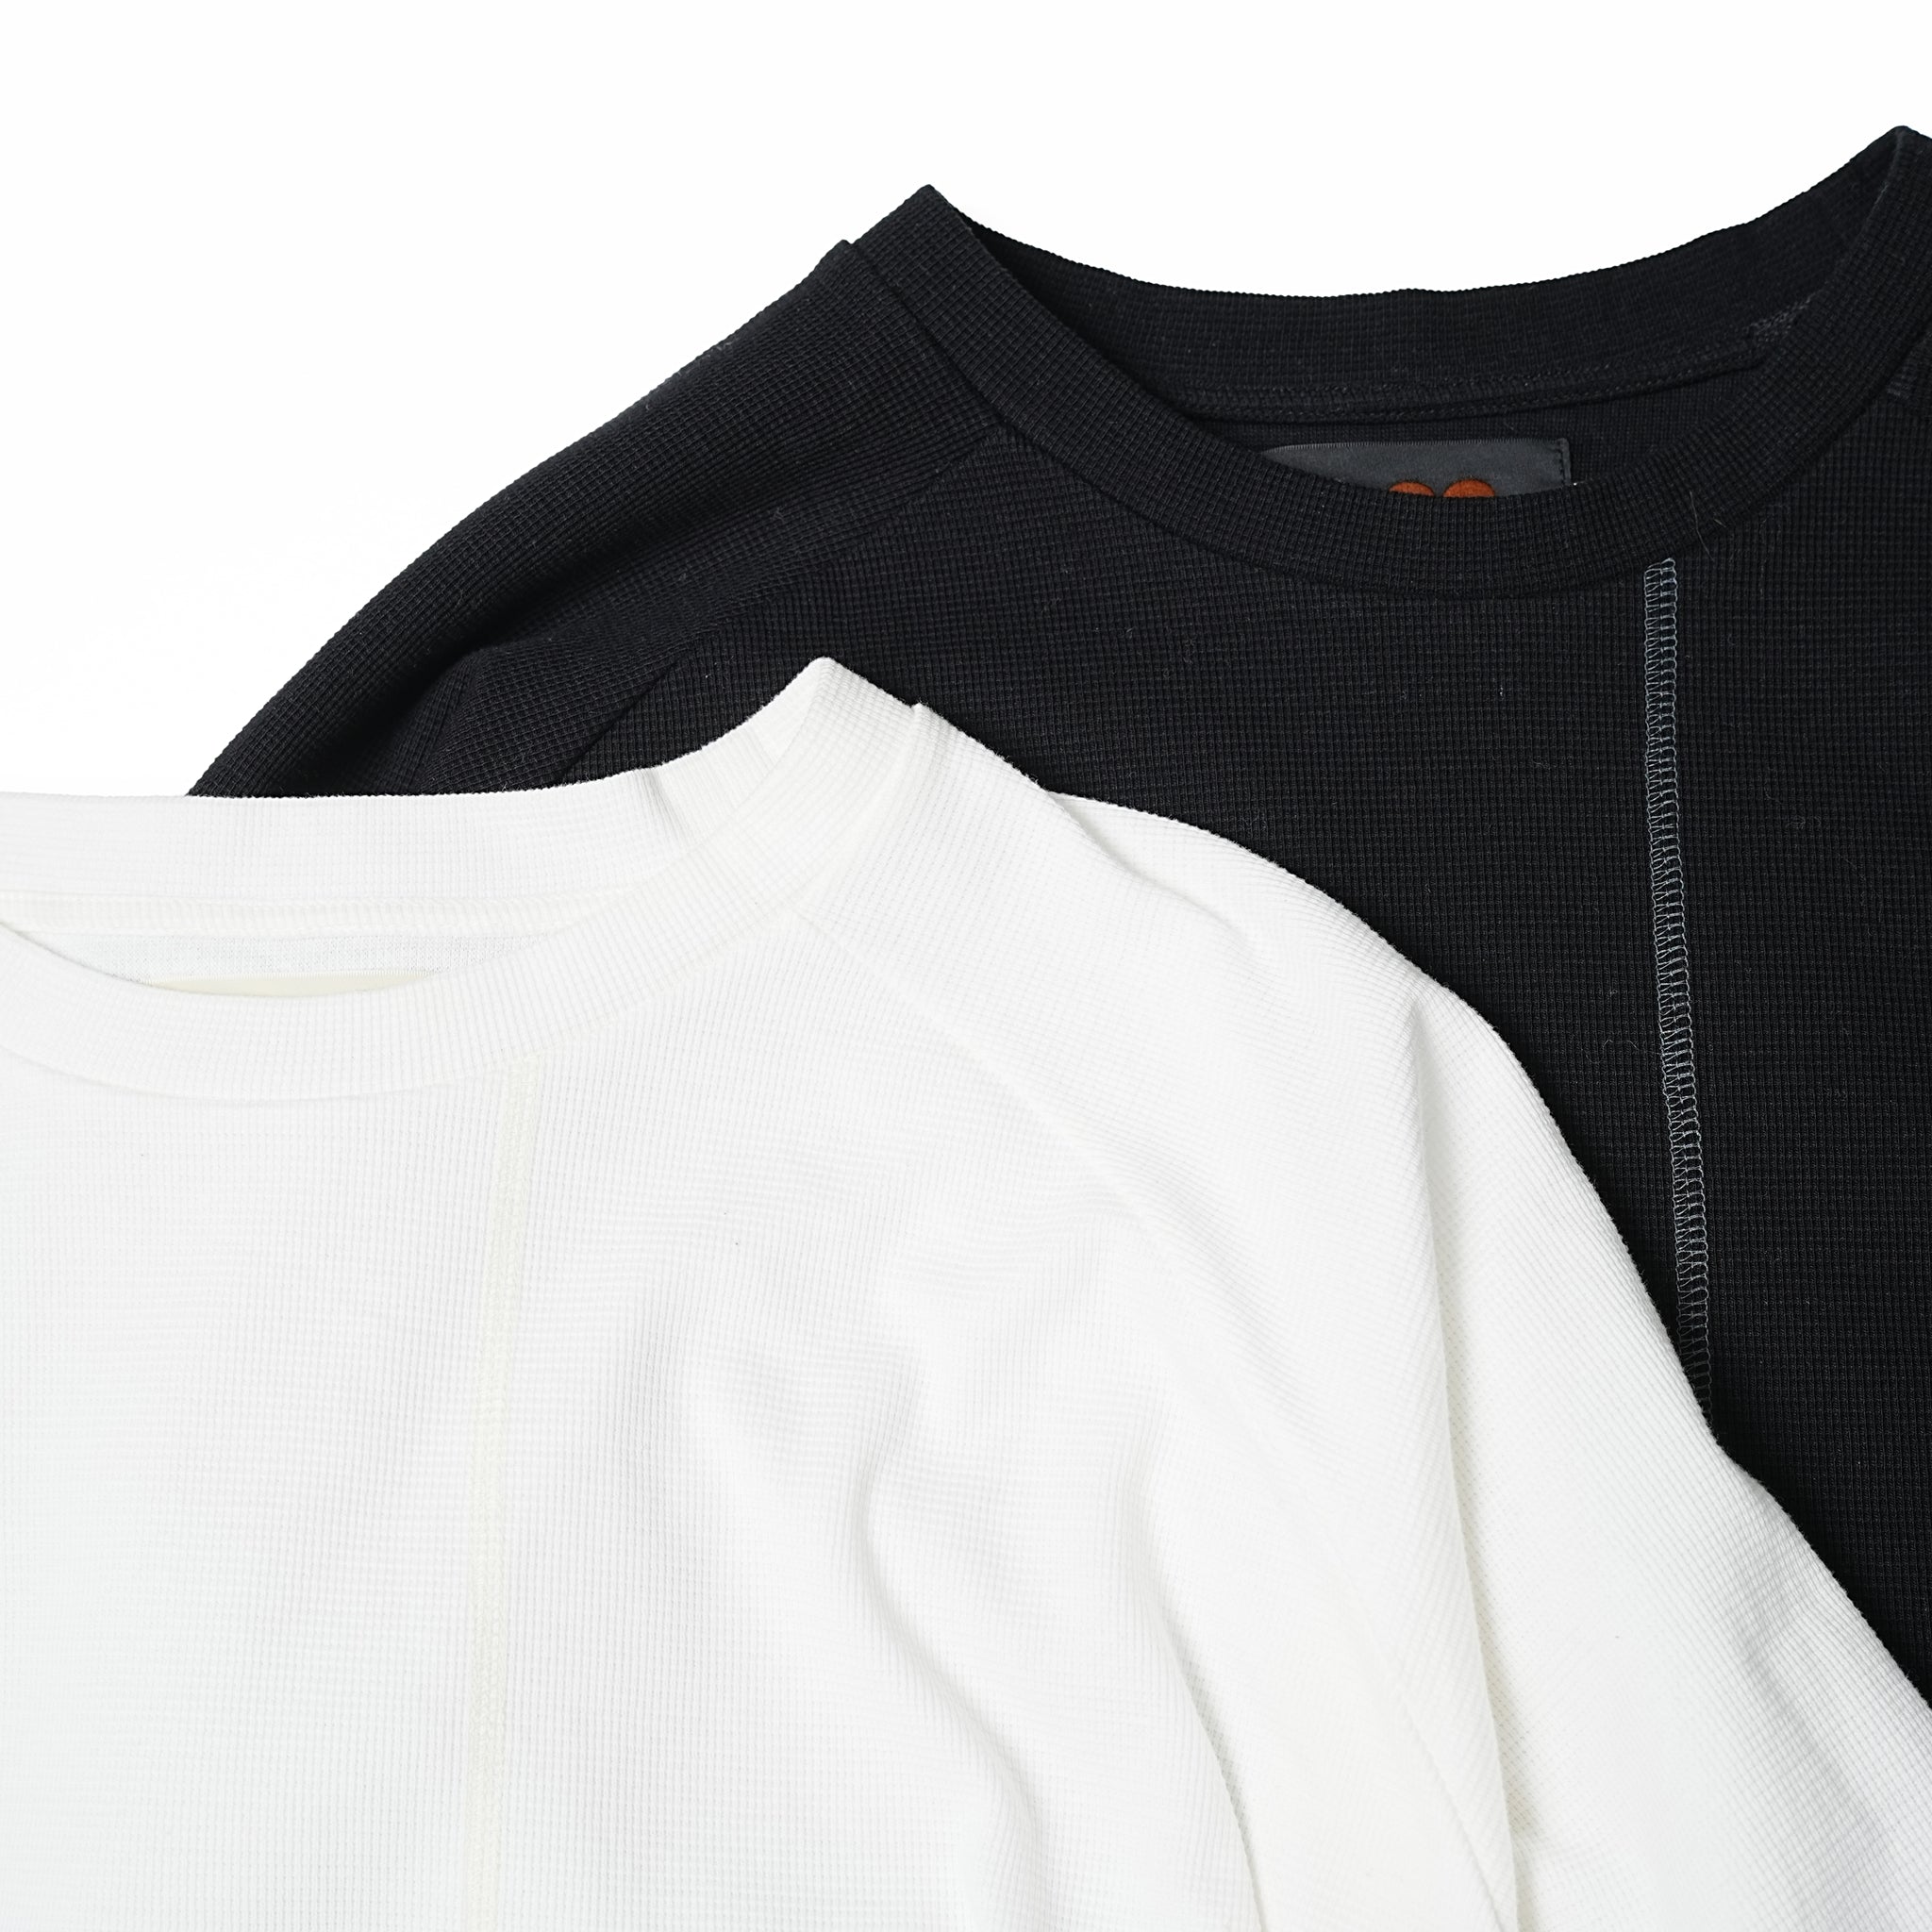 No:VOO-1165 | Name:D.STITCH THERMAL LT | Color:White/Black/Woodland【VOO_ヴォー】【入荷予定アイテム・入荷連絡可能】